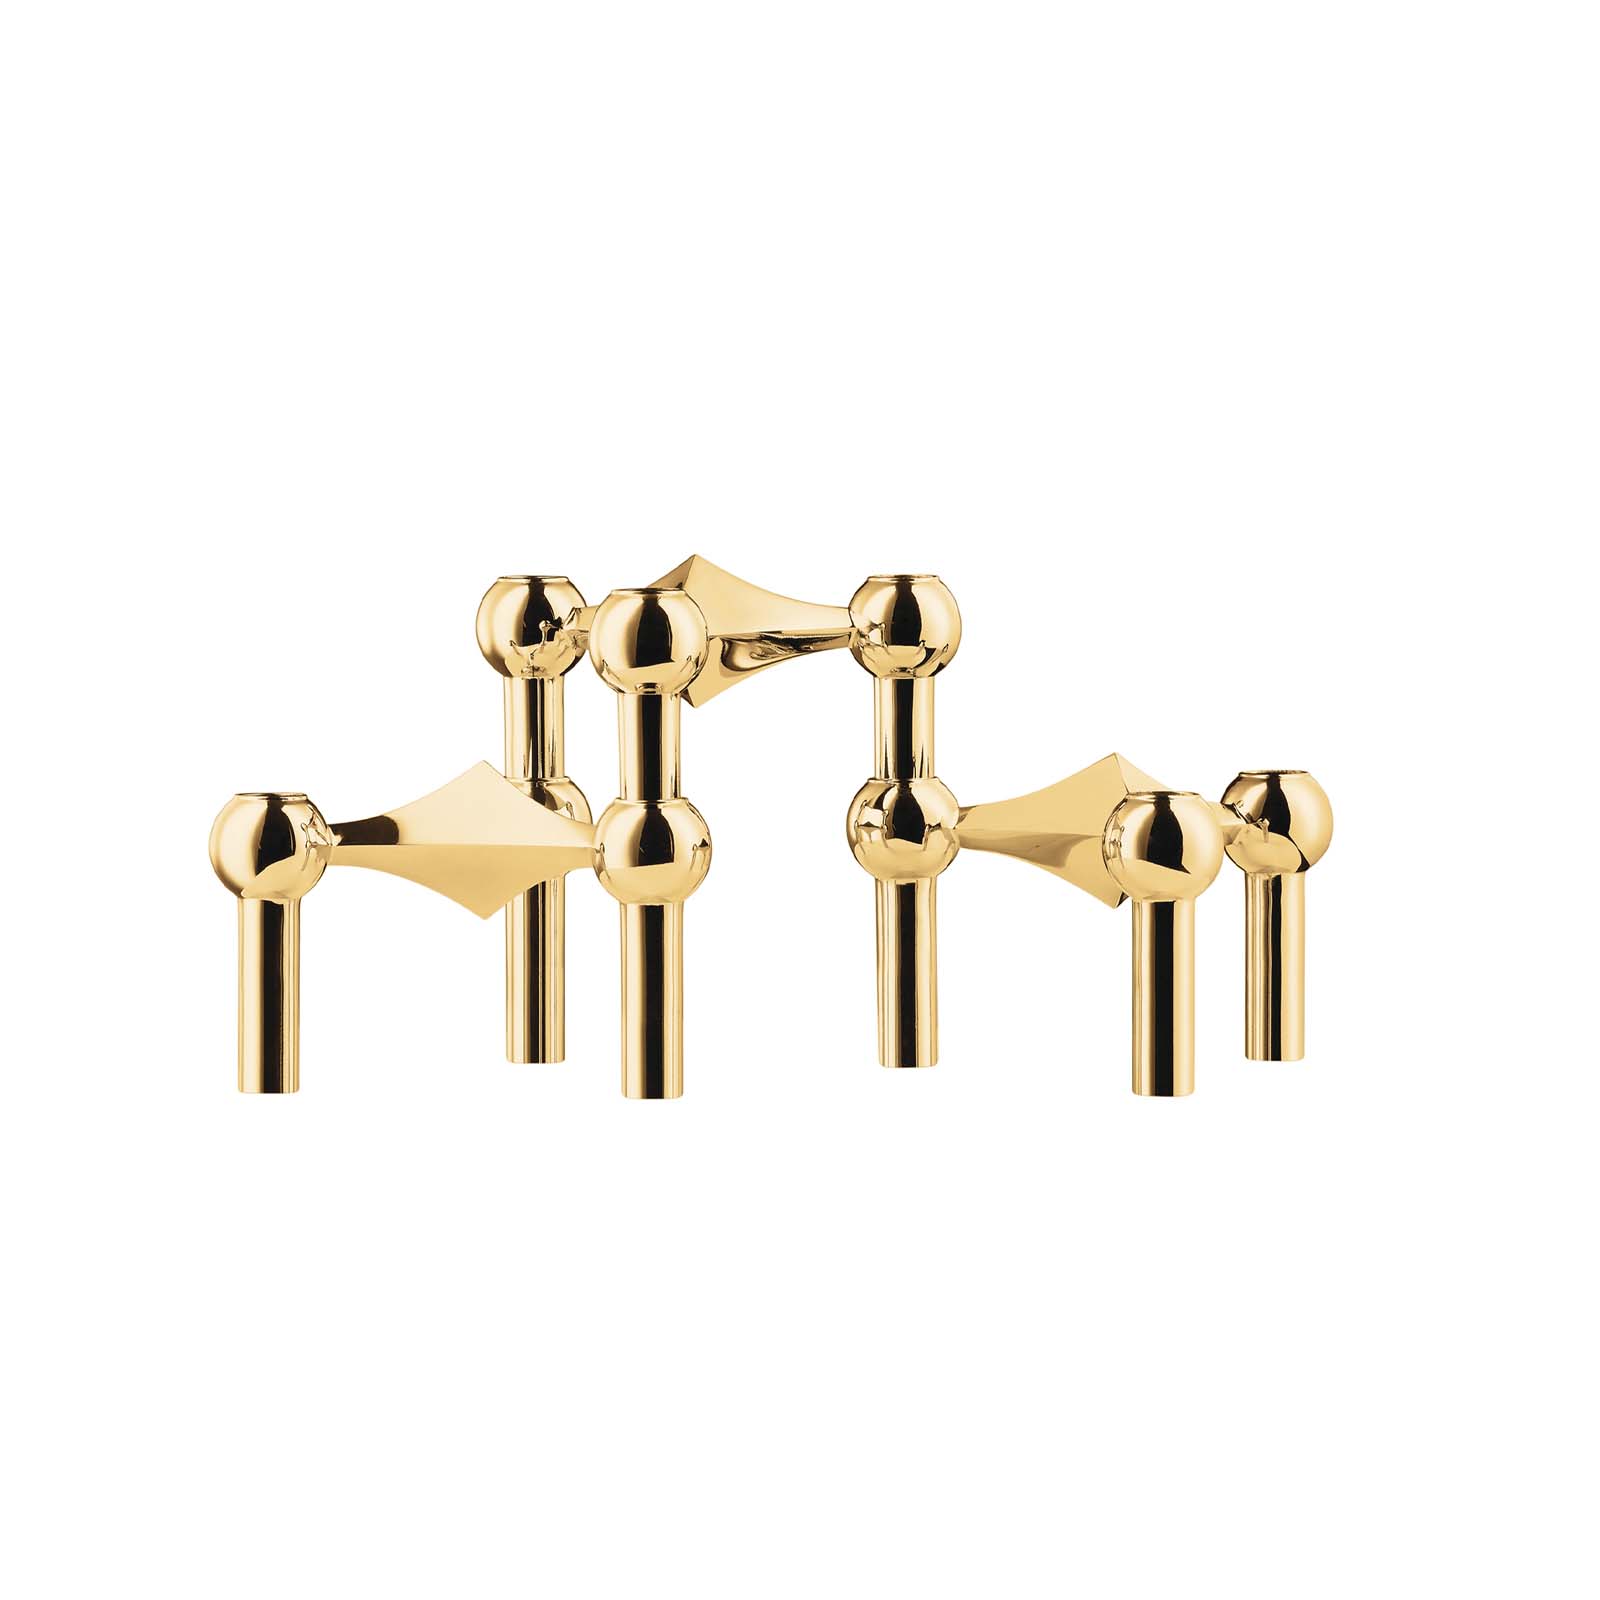 FABRIC Nail Stage, solid brass